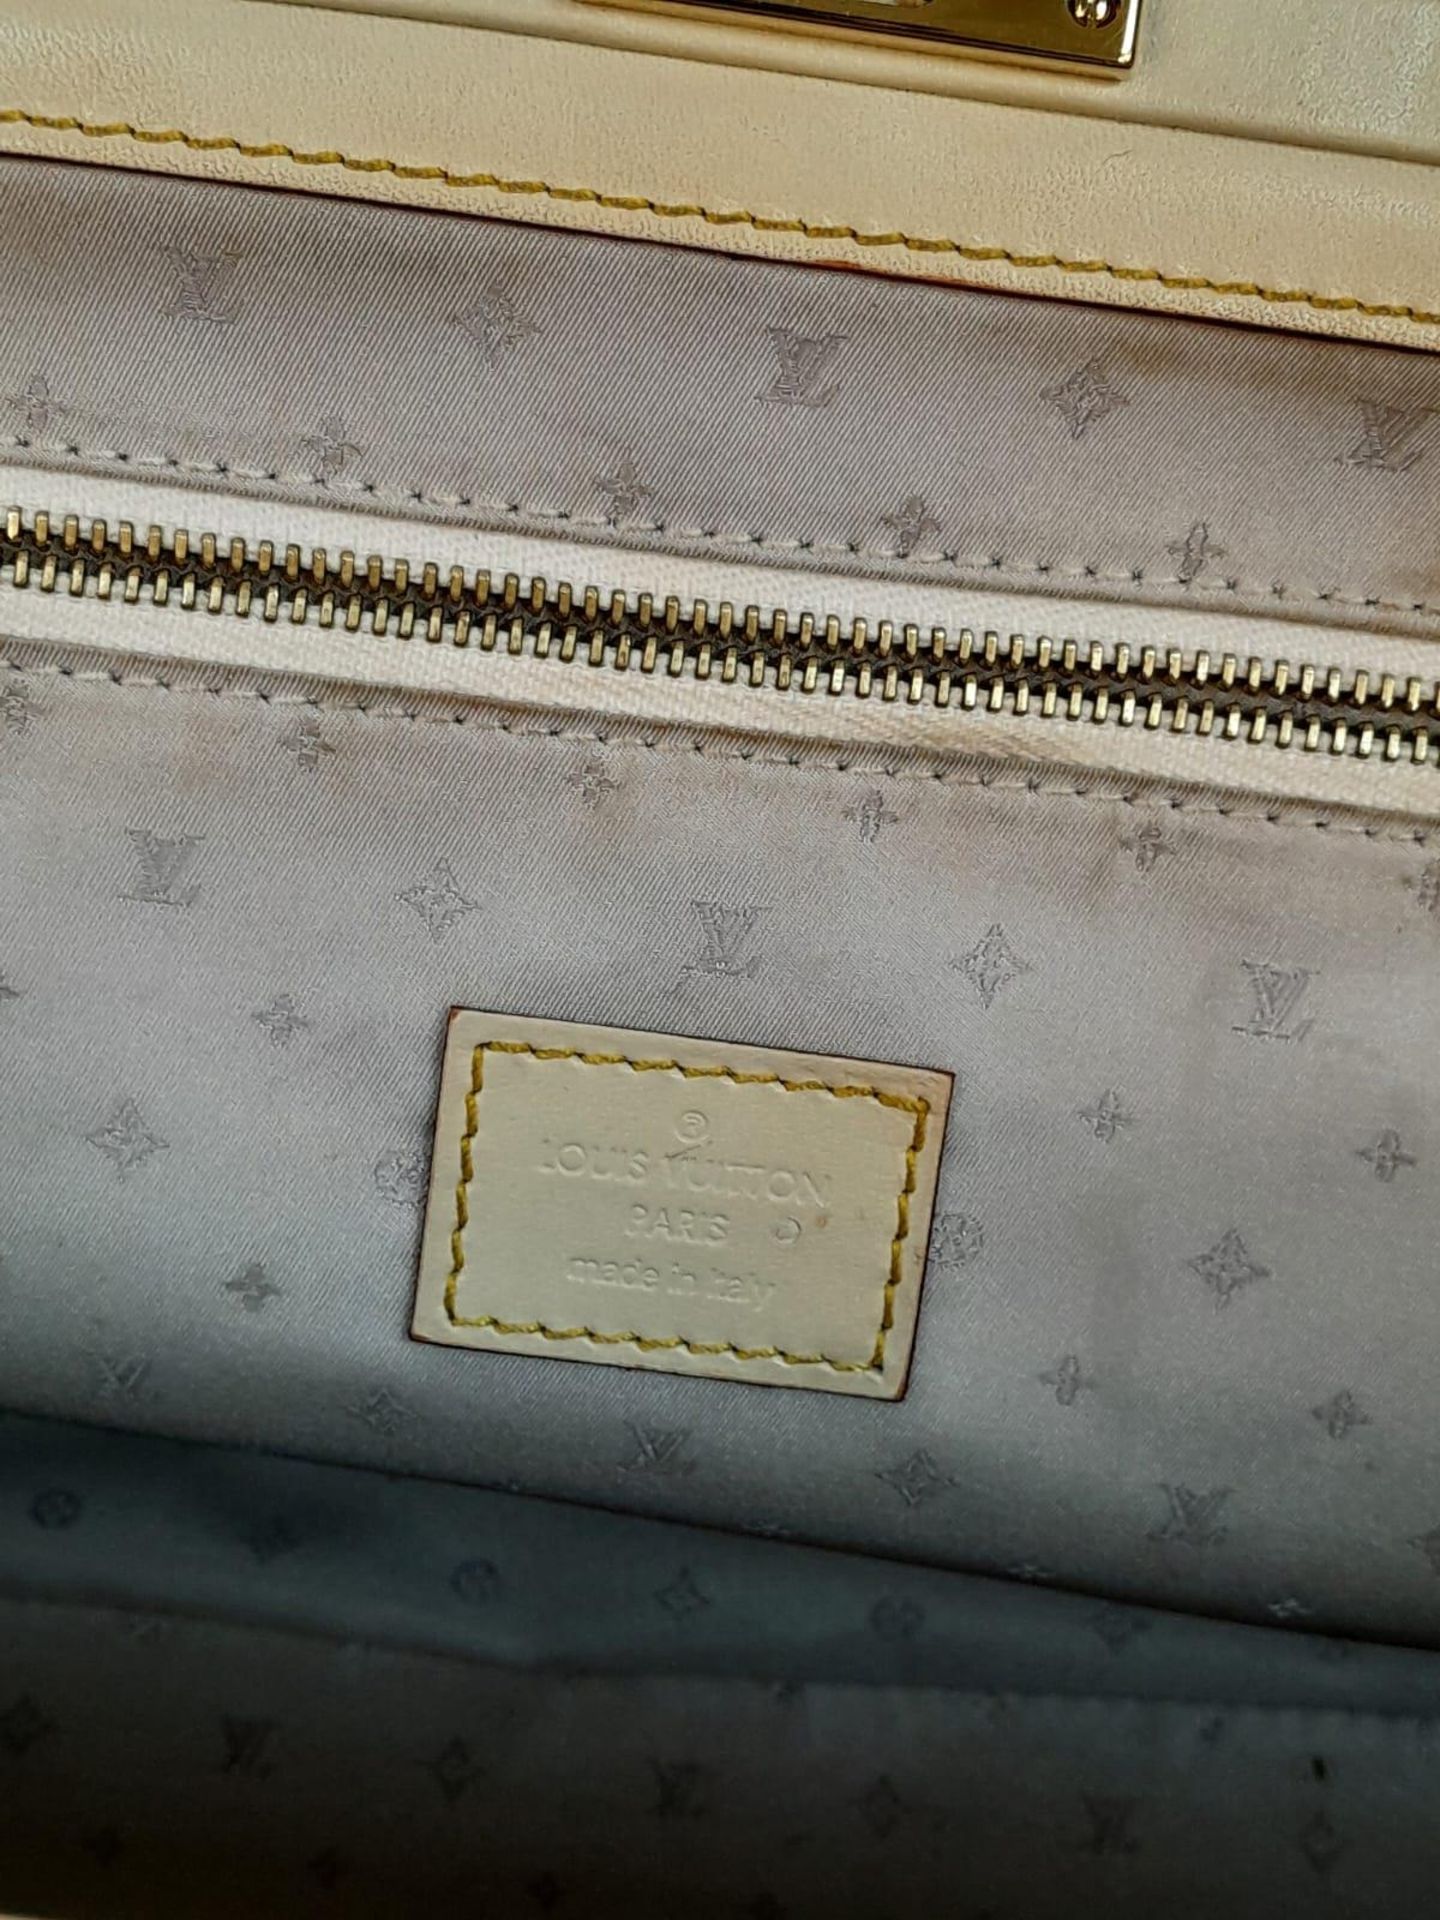 A Louis Vuitton Manhattan PM Suhali Leather Handbag. Soft white textured leather exterior with - Image 9 of 9